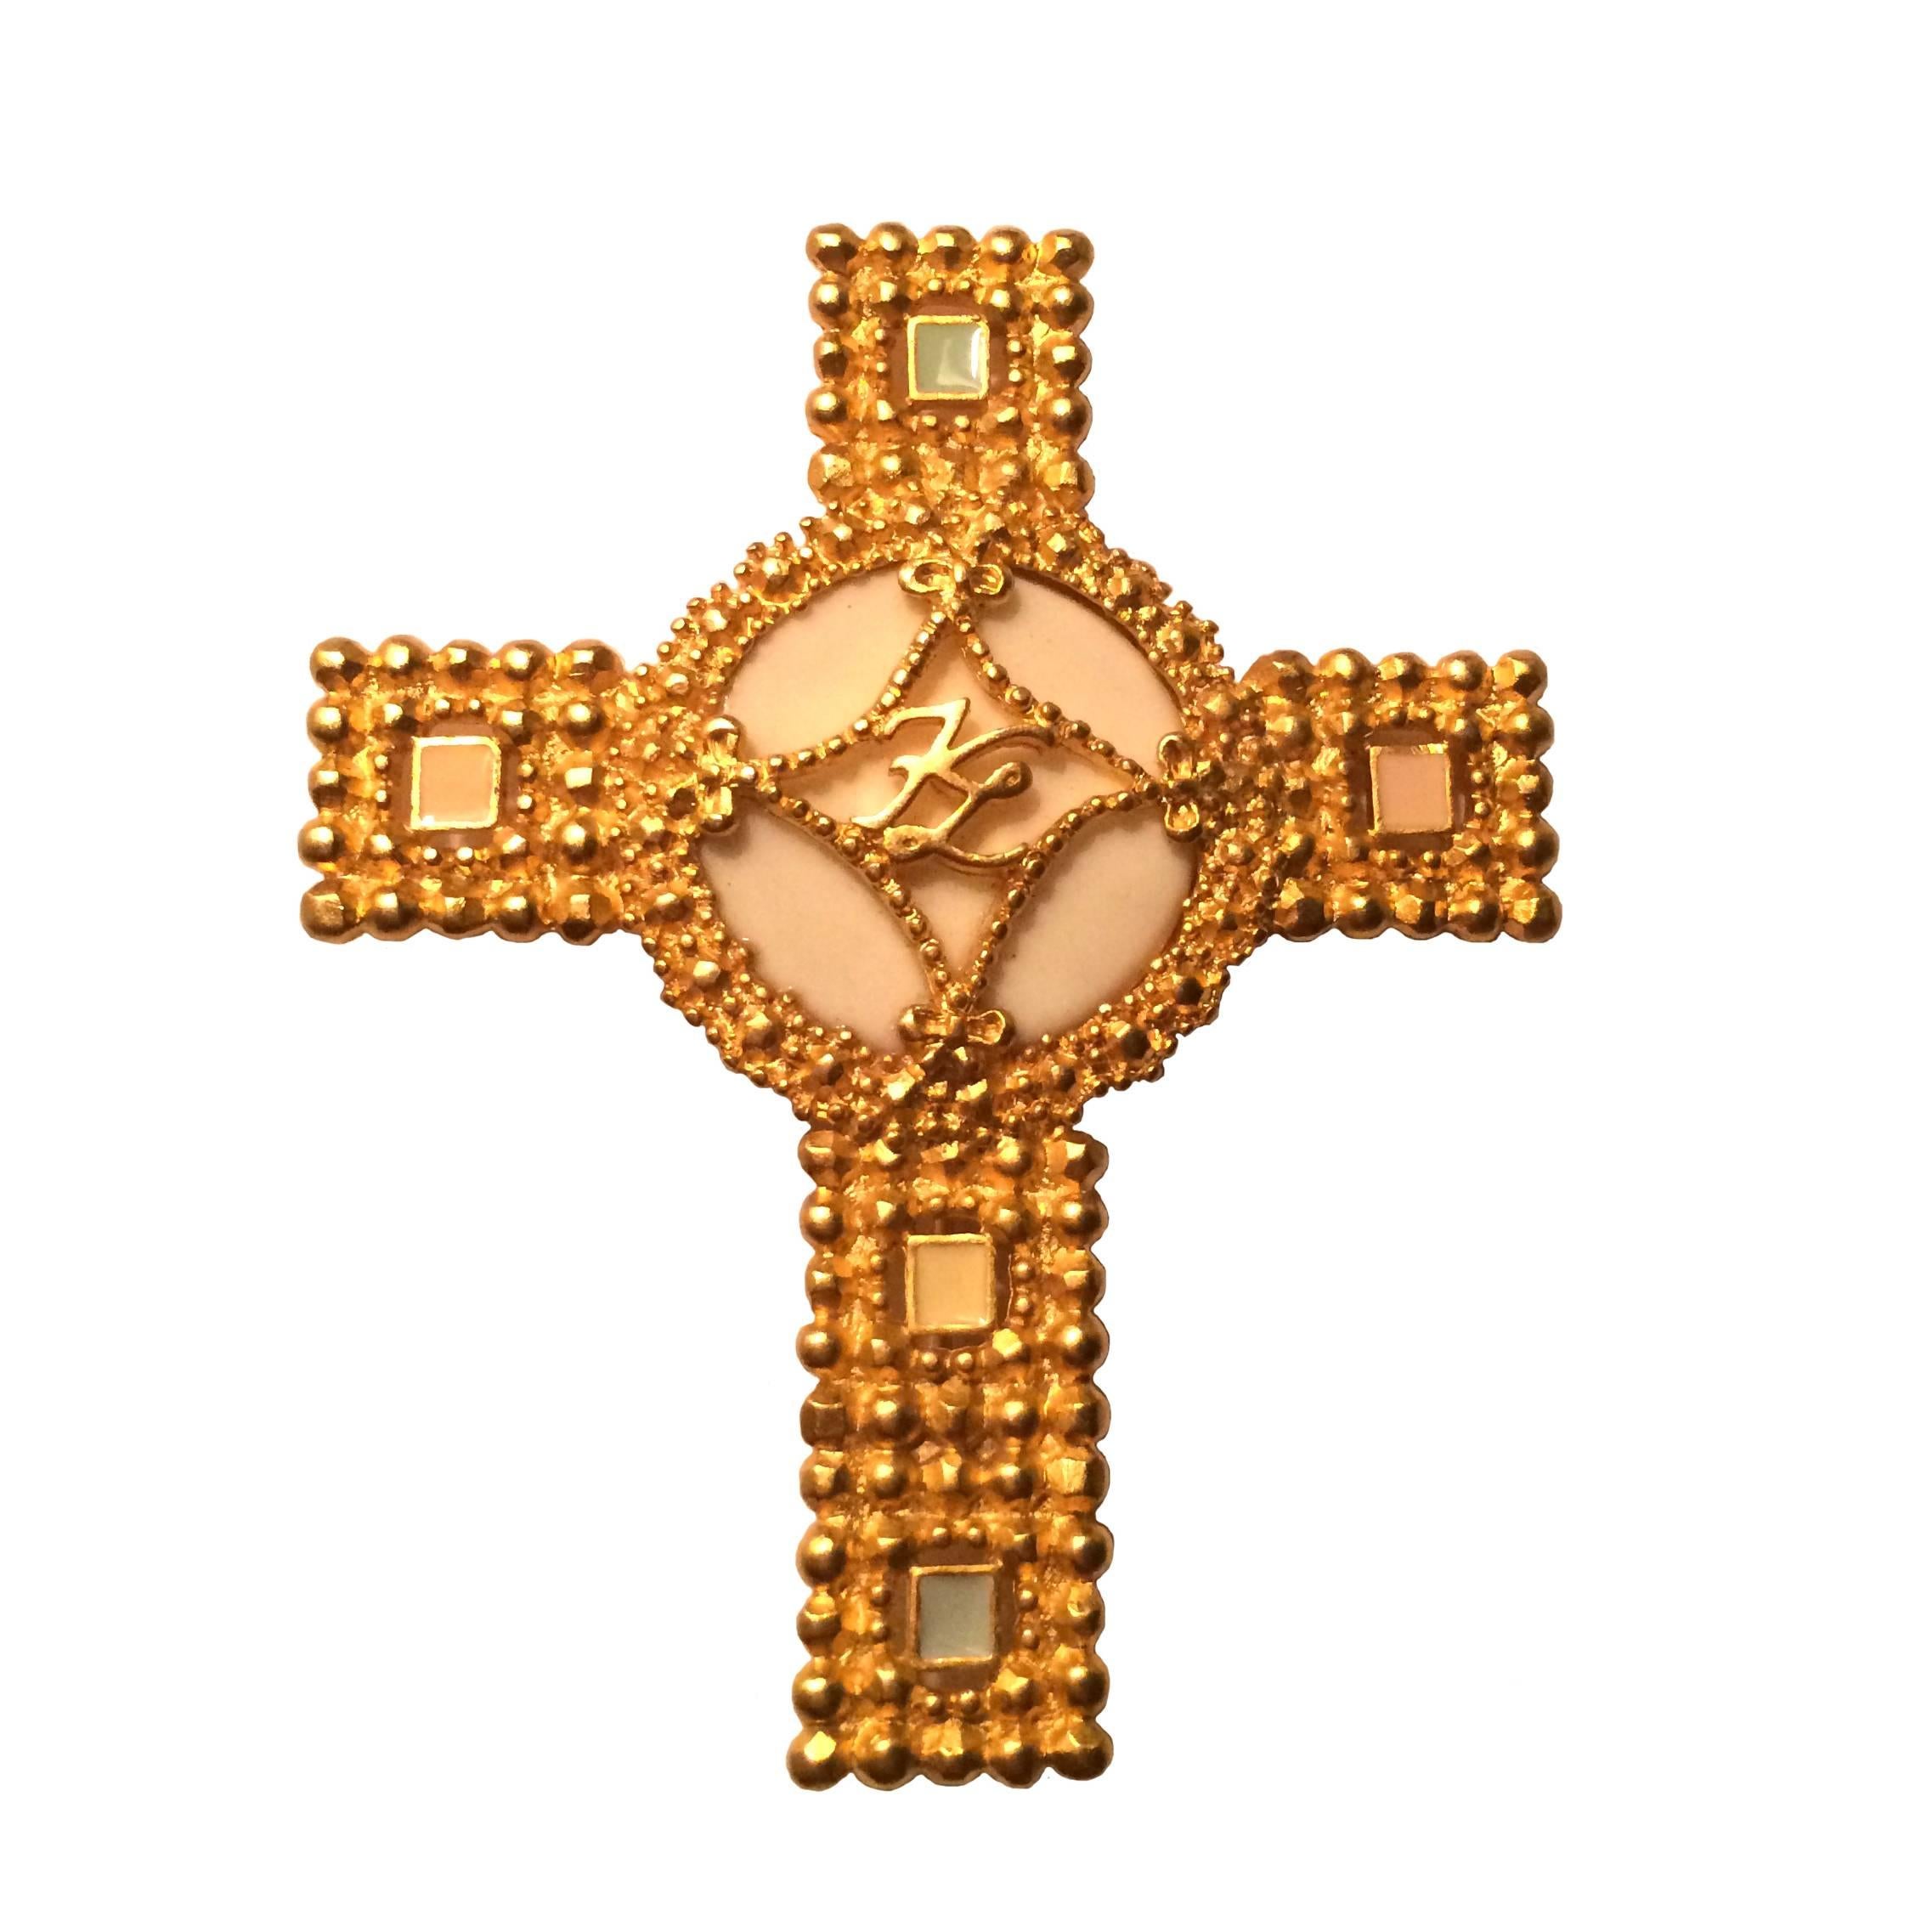 Karl Lagerfeld Gold Cross Pin with Pastel Enamel Details, 1990s 